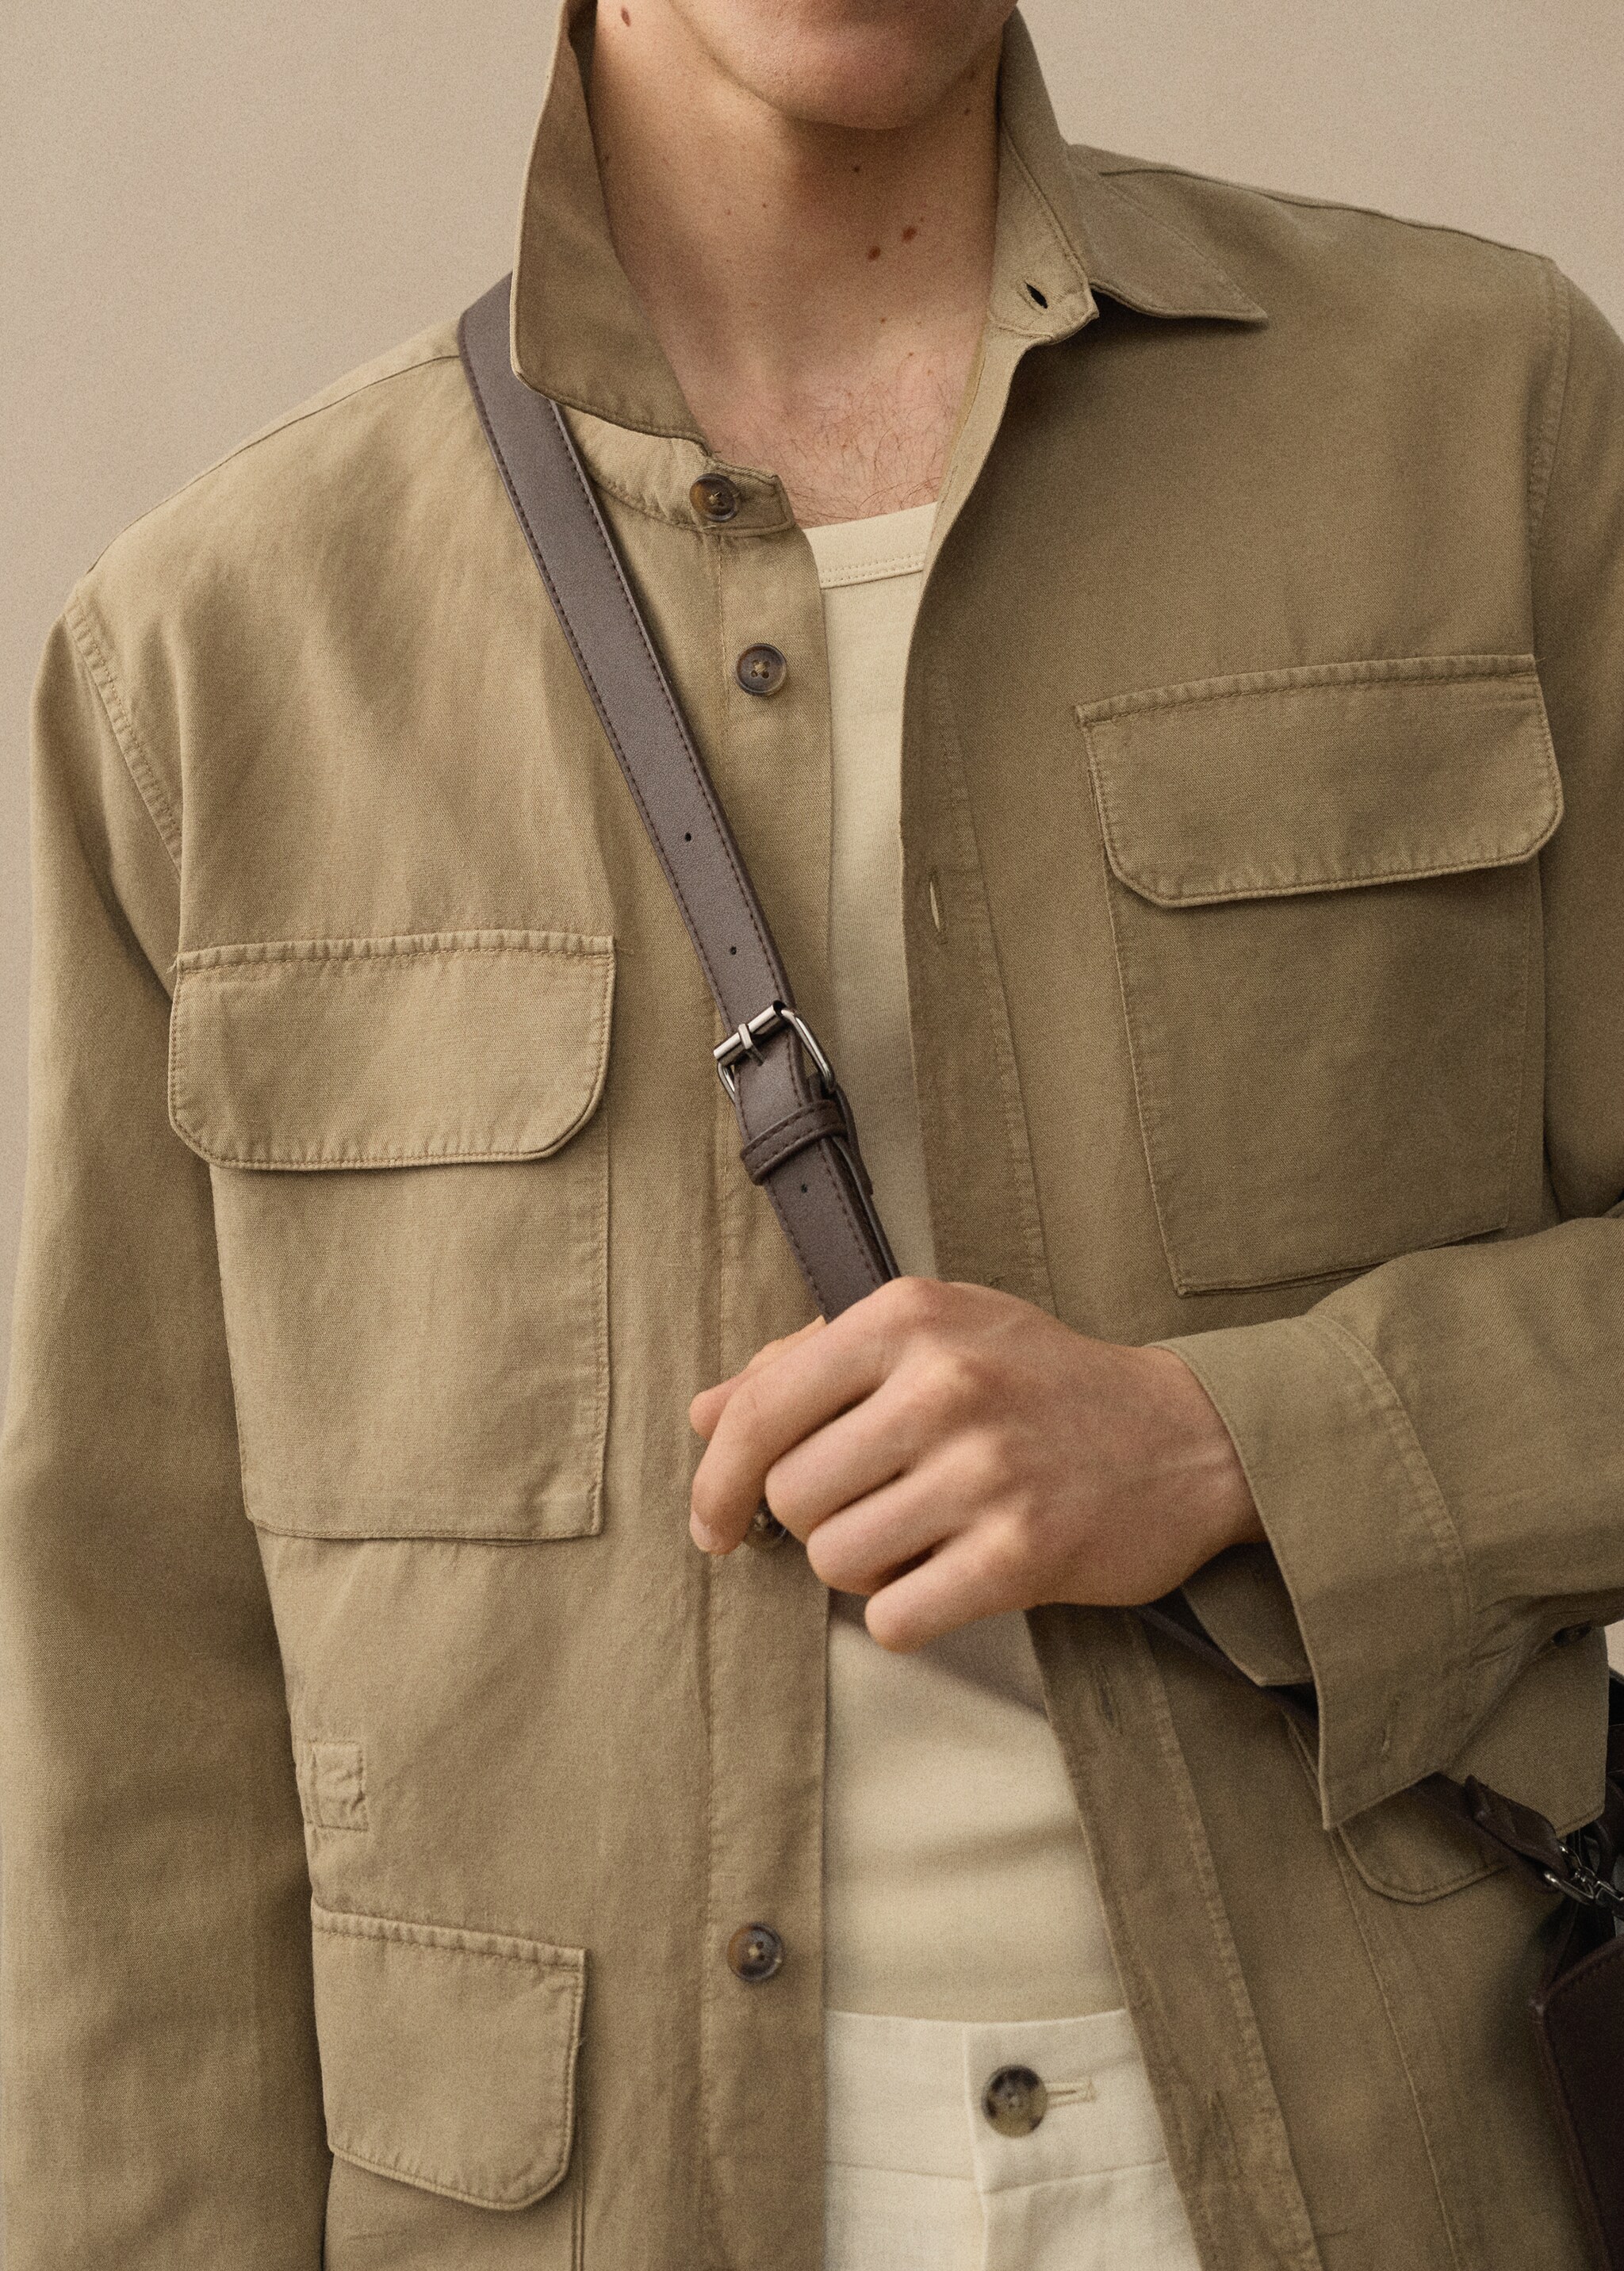 Linen overshirt with pockets - Details of the article 5